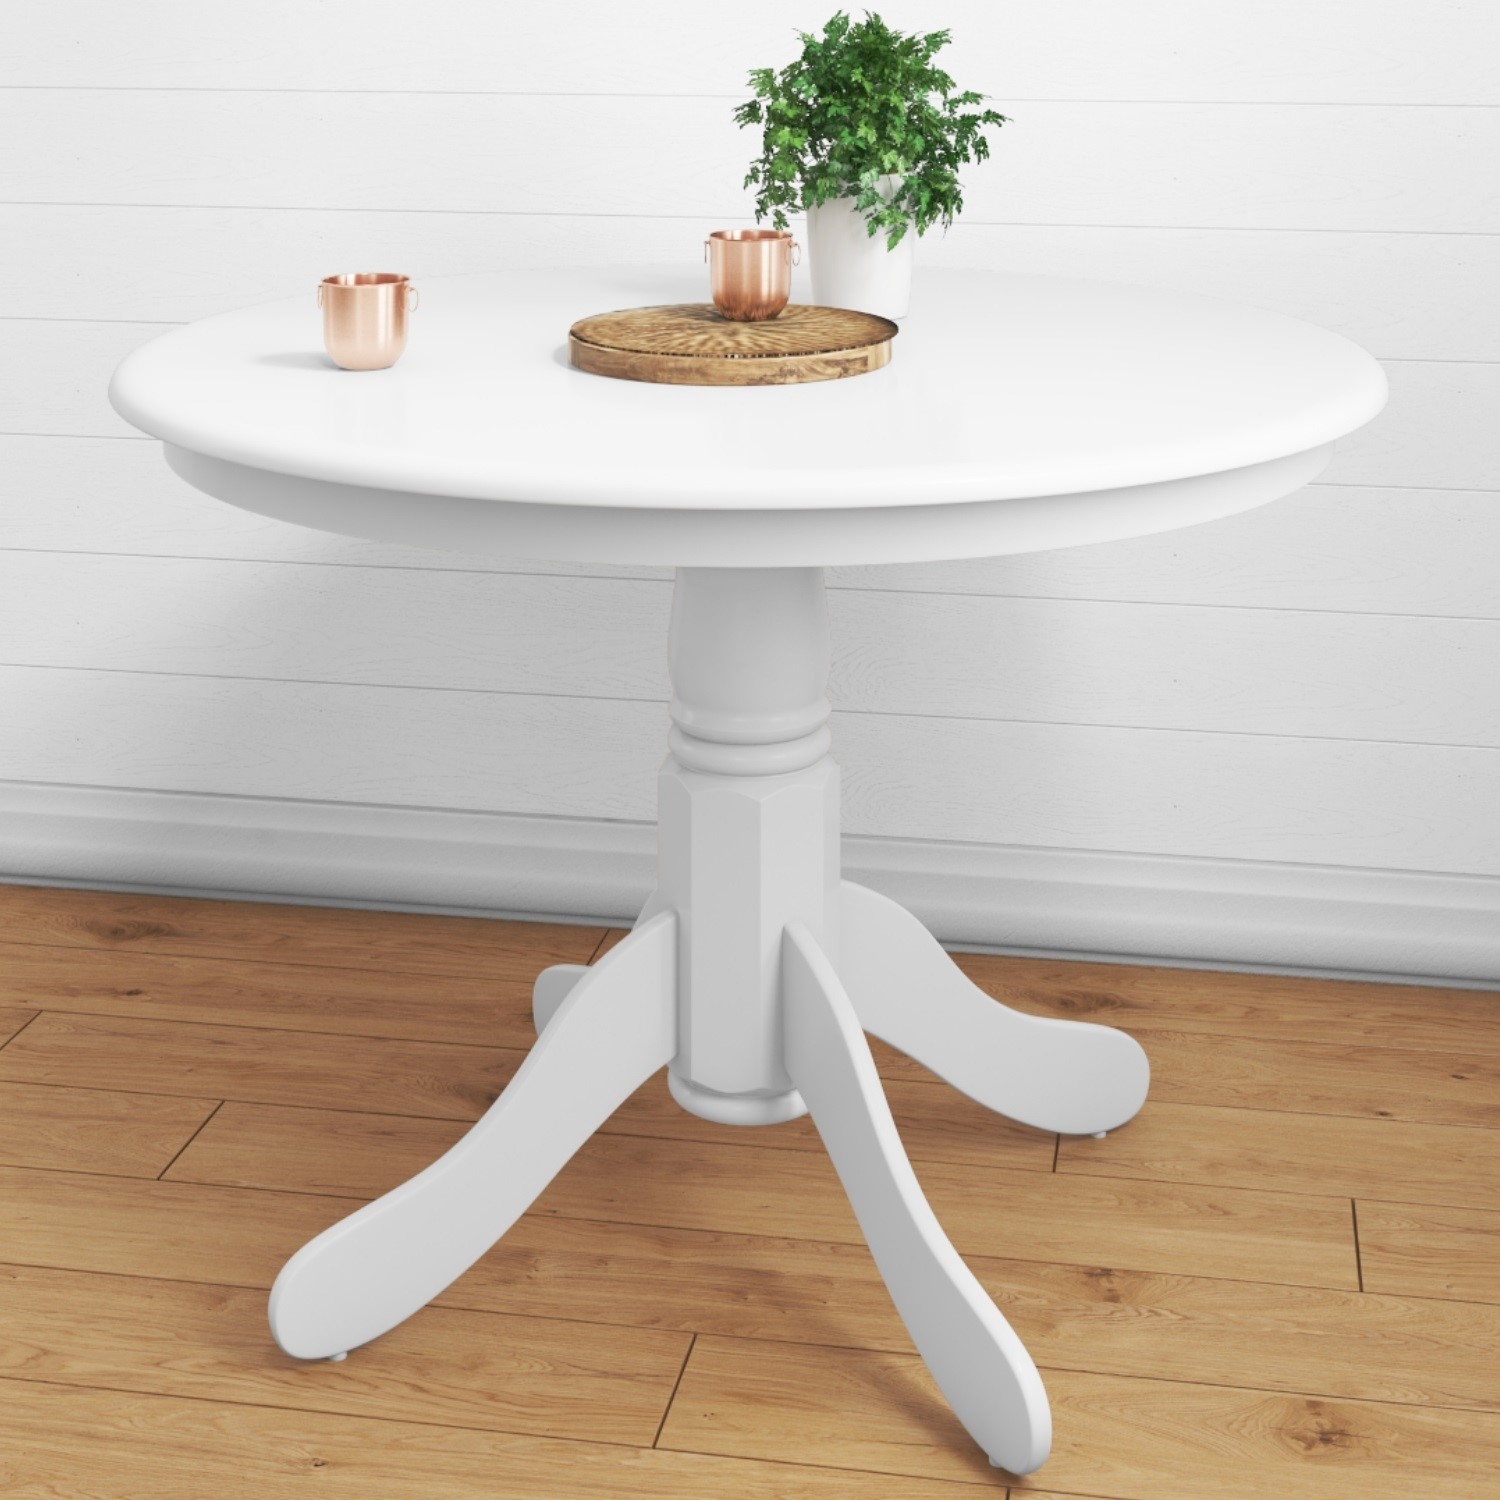 Small Round Dining Table In White, Small Round White Kitchen Table Set